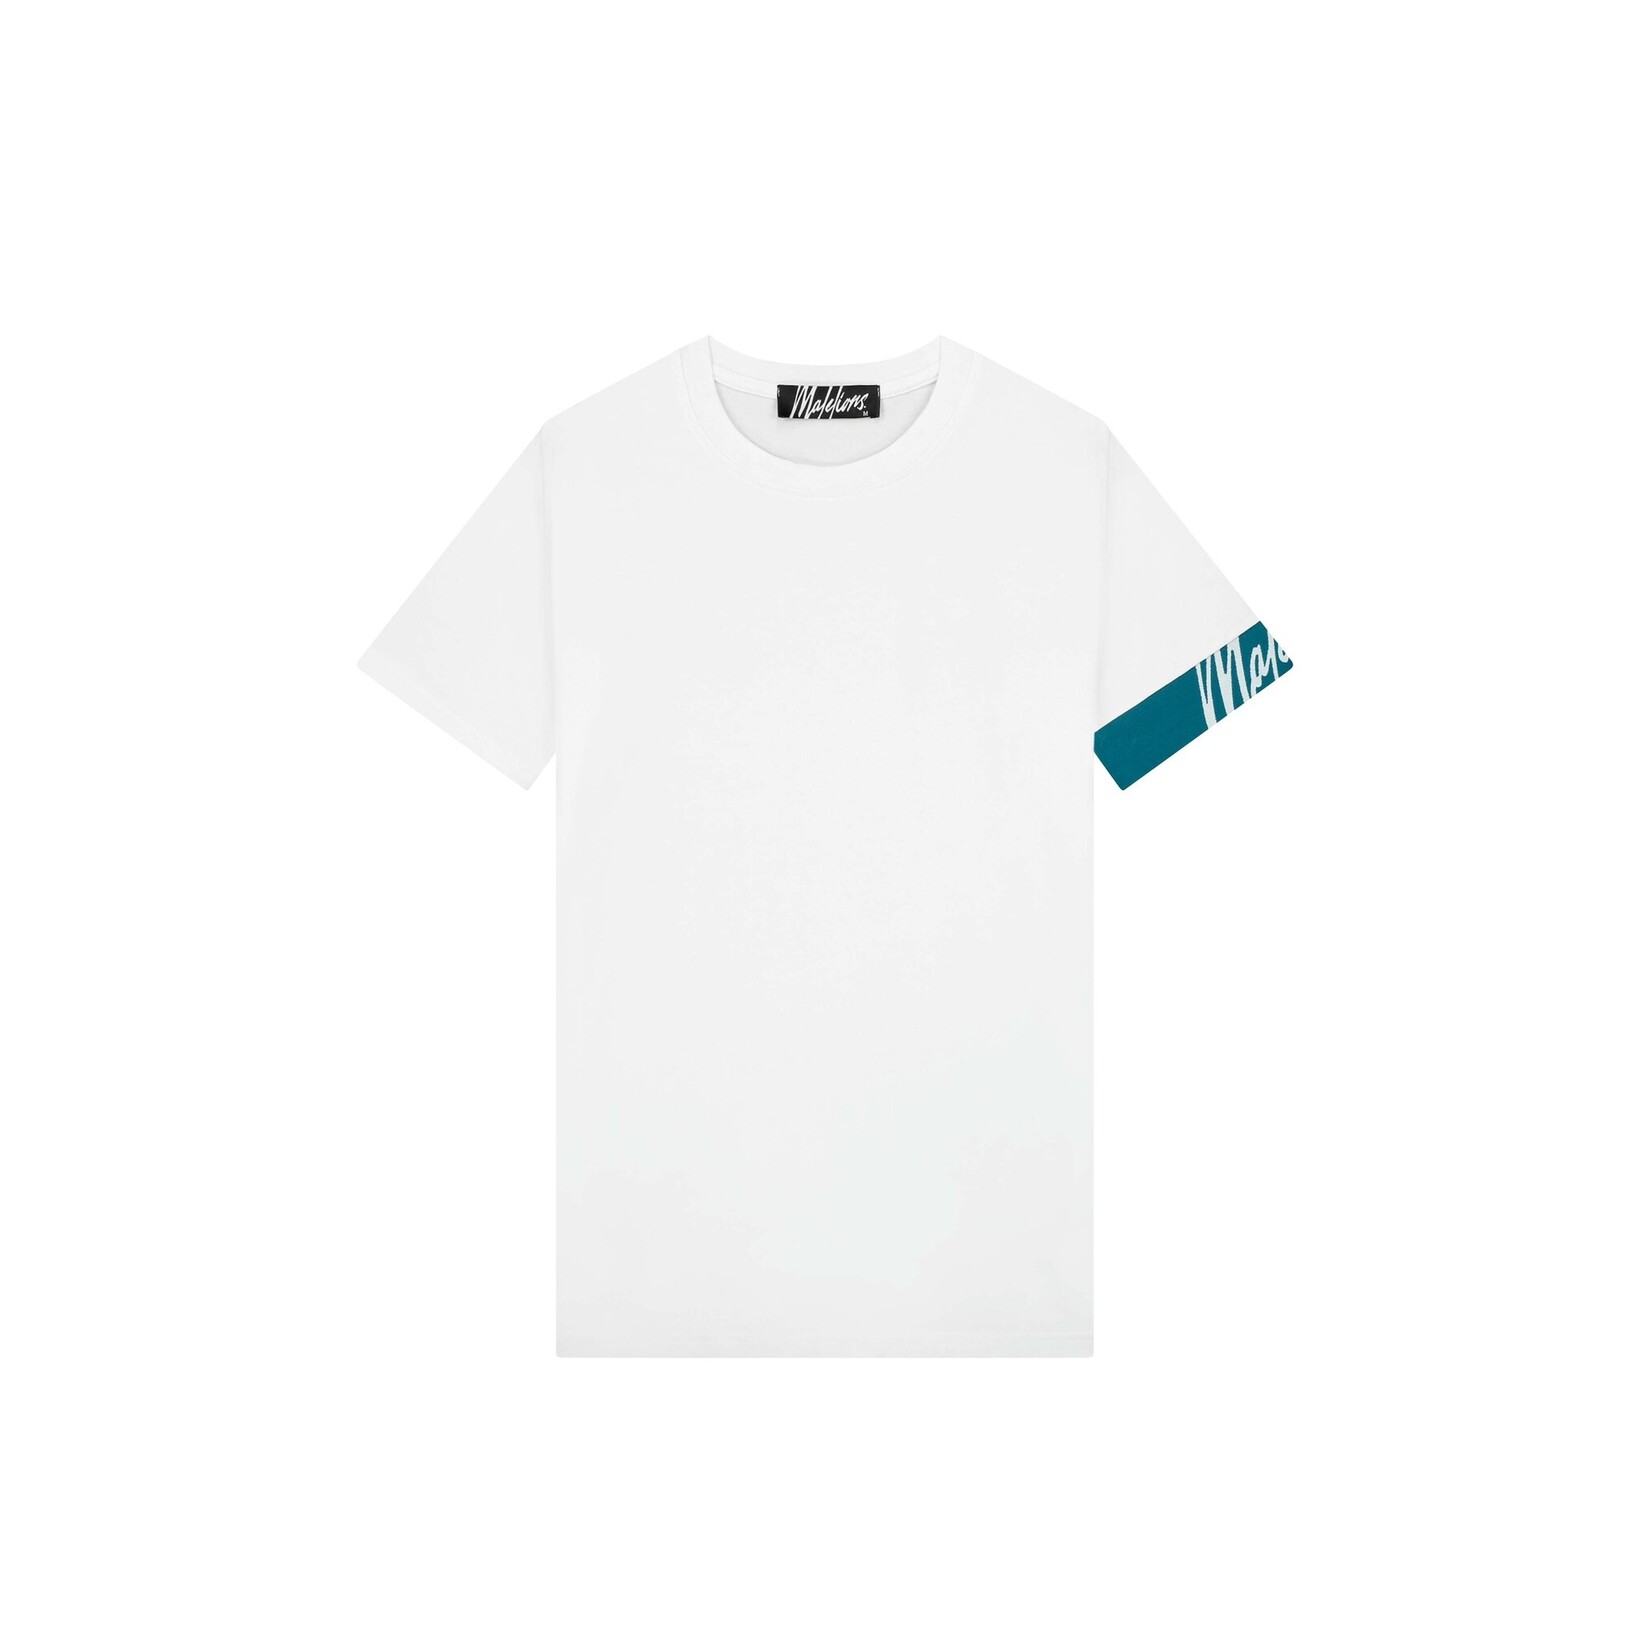 Malelions Captain T-shirt 2.0 White-Teal